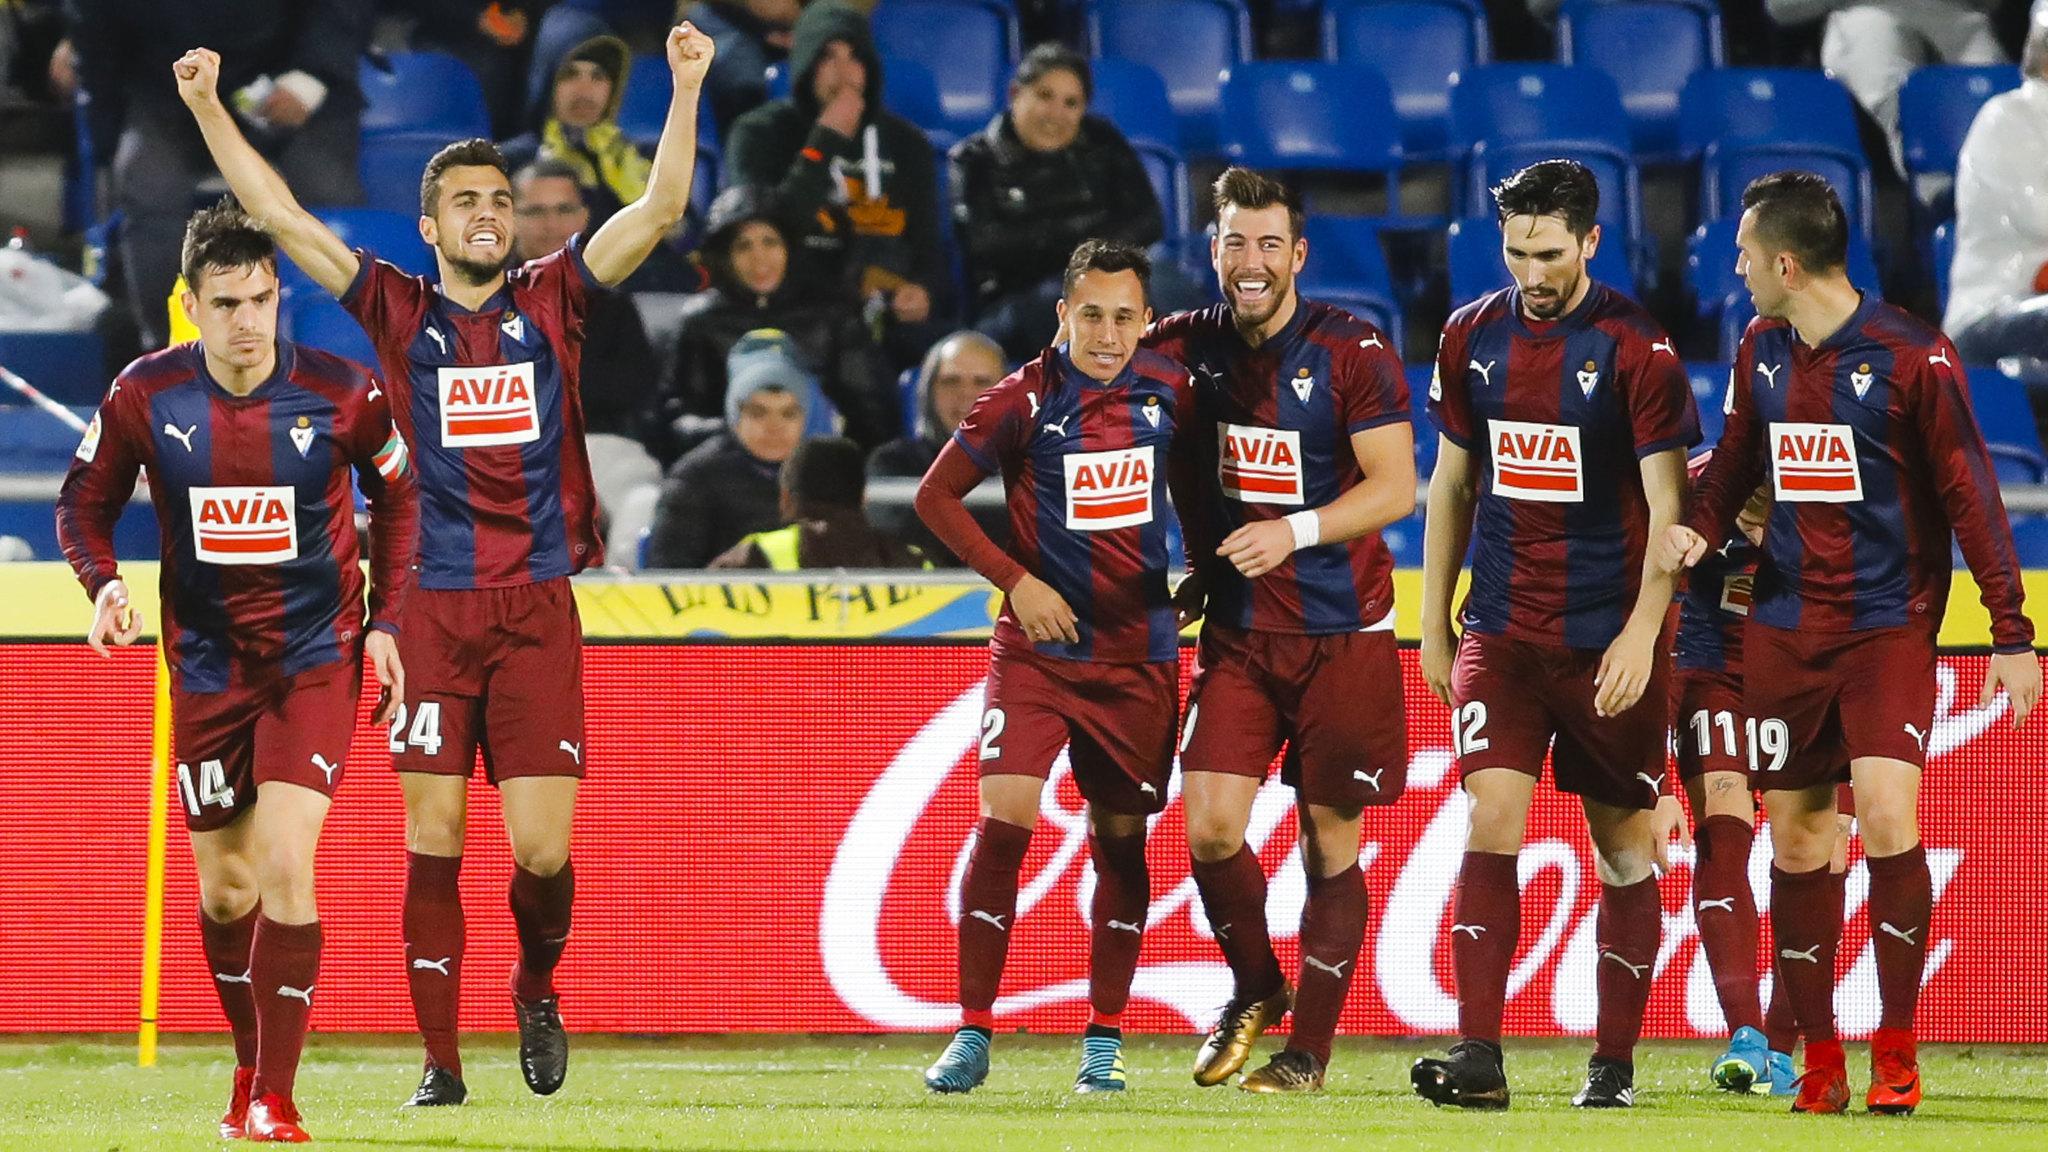 LaLiga: Europe's most in form team is. Eibar!. MARCA in English